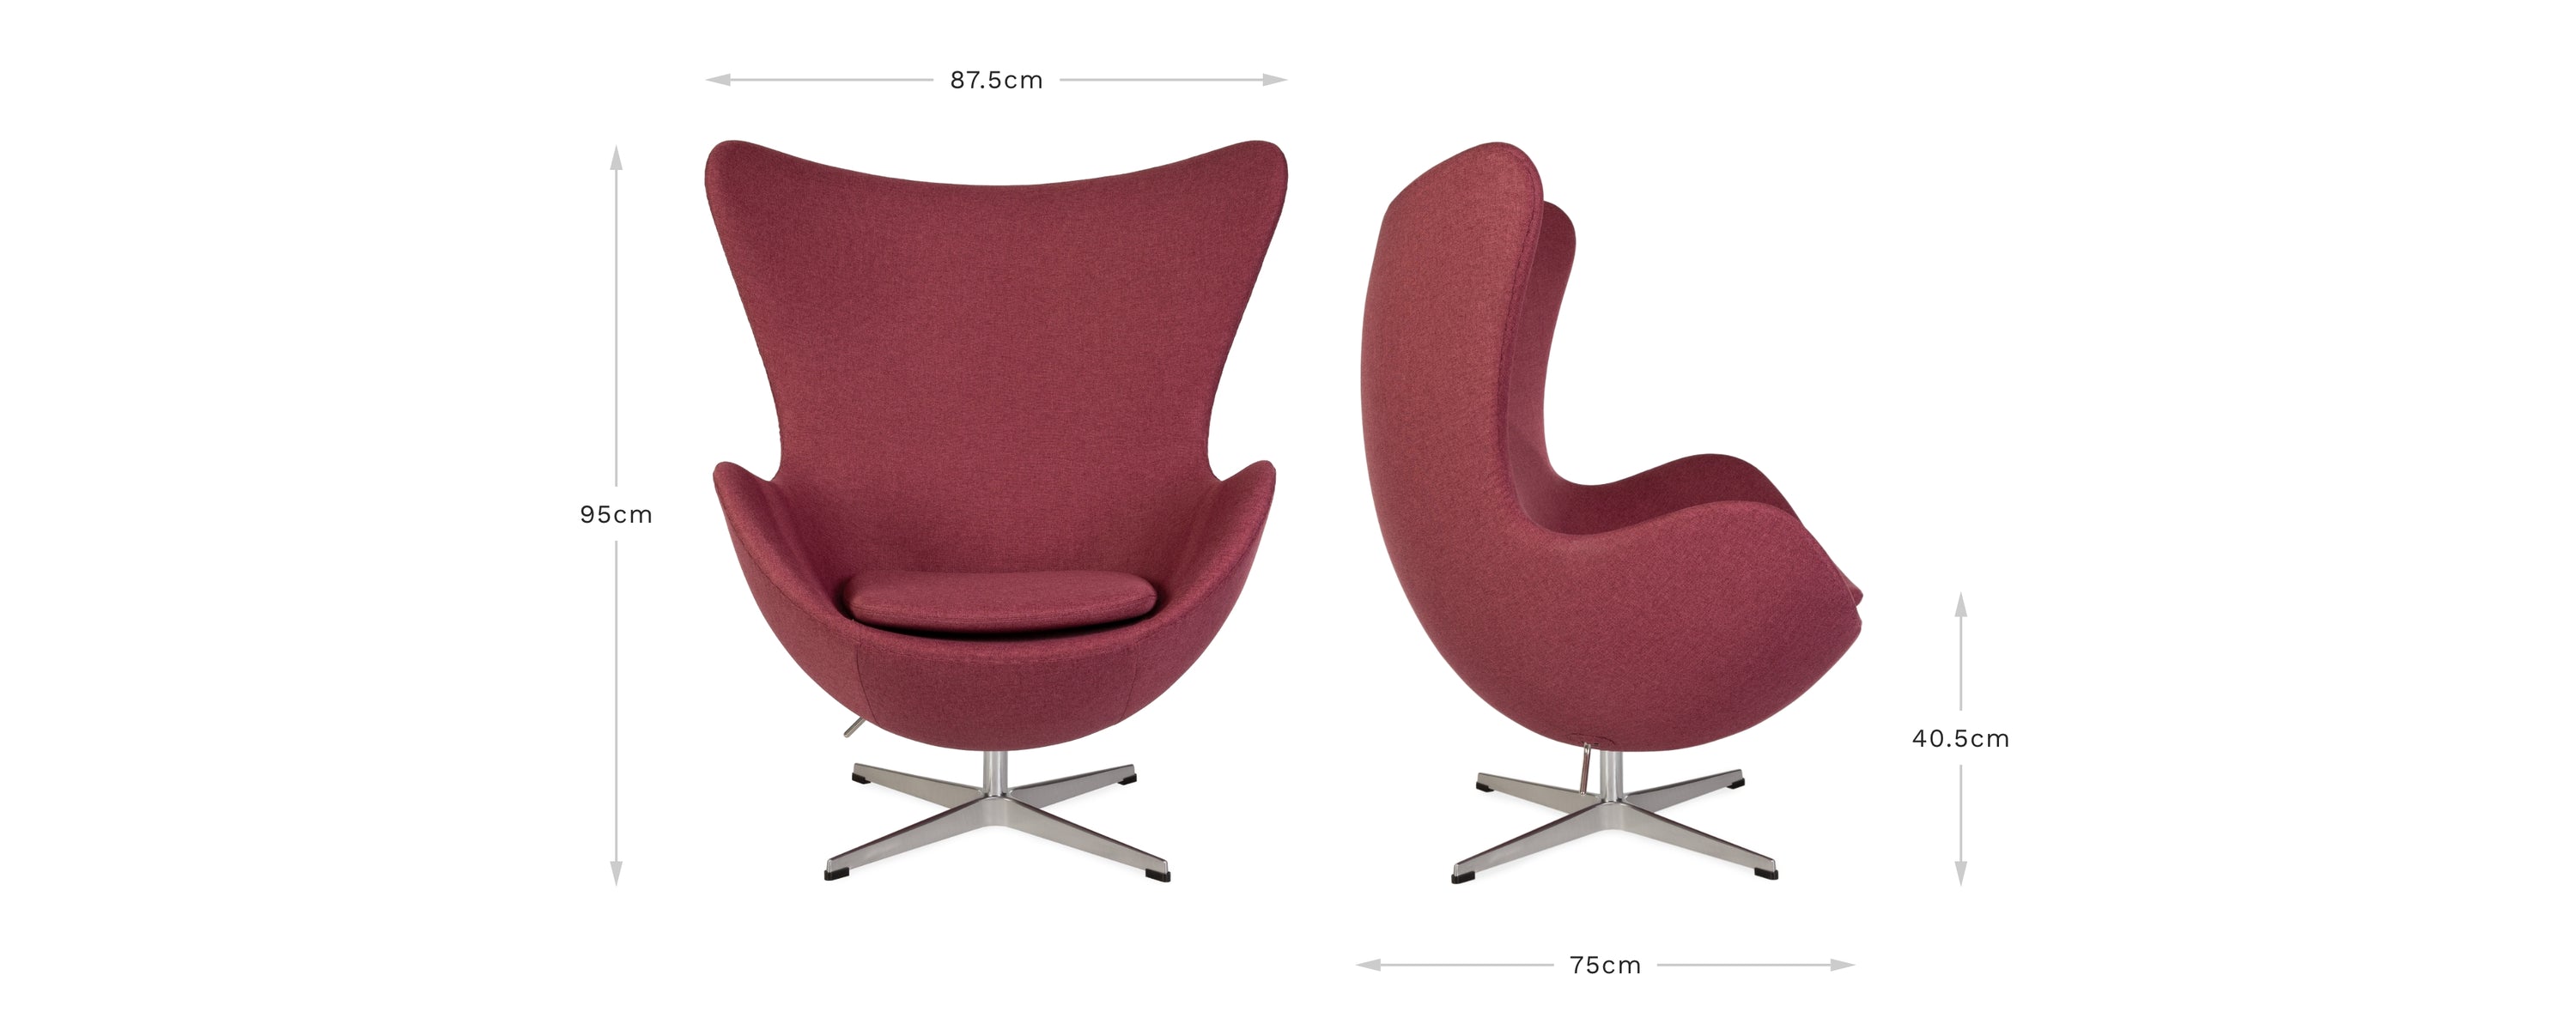 View of front and side of the pink fabric Jacobsen Egg Chair on a white background displaying the dimensions